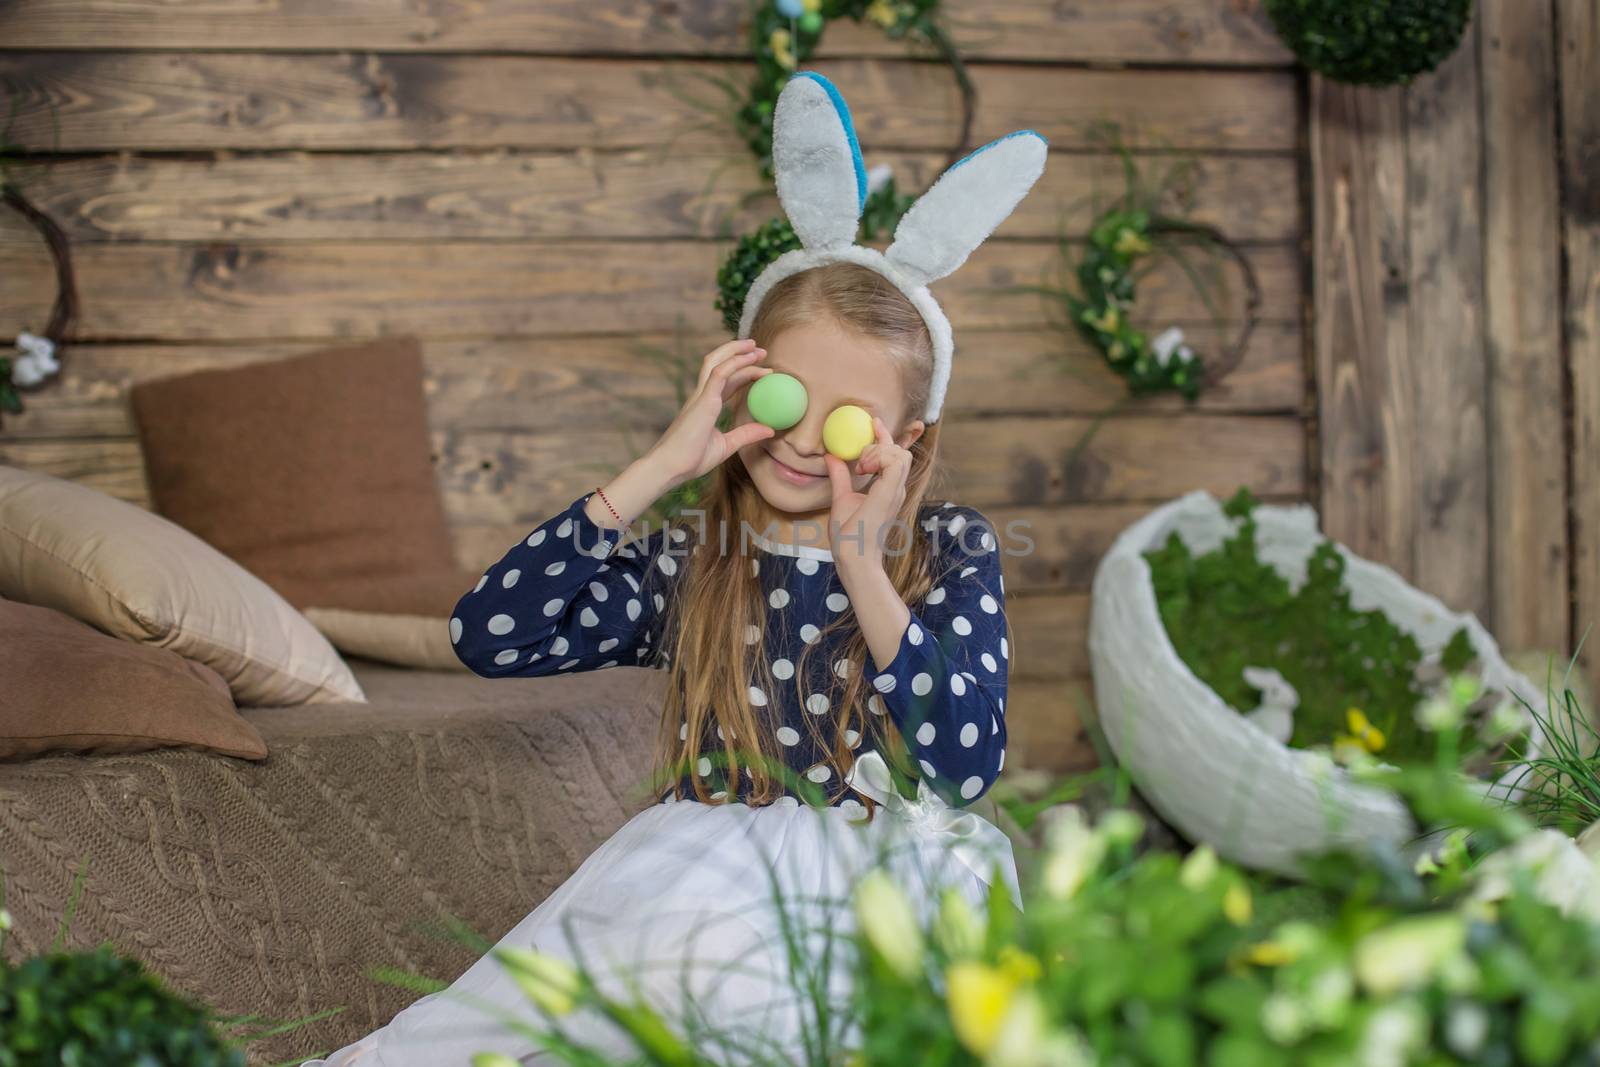 
Funny portrait of girl having fun on Easter wearing bunny ears and holding eggs on eyes during spring season